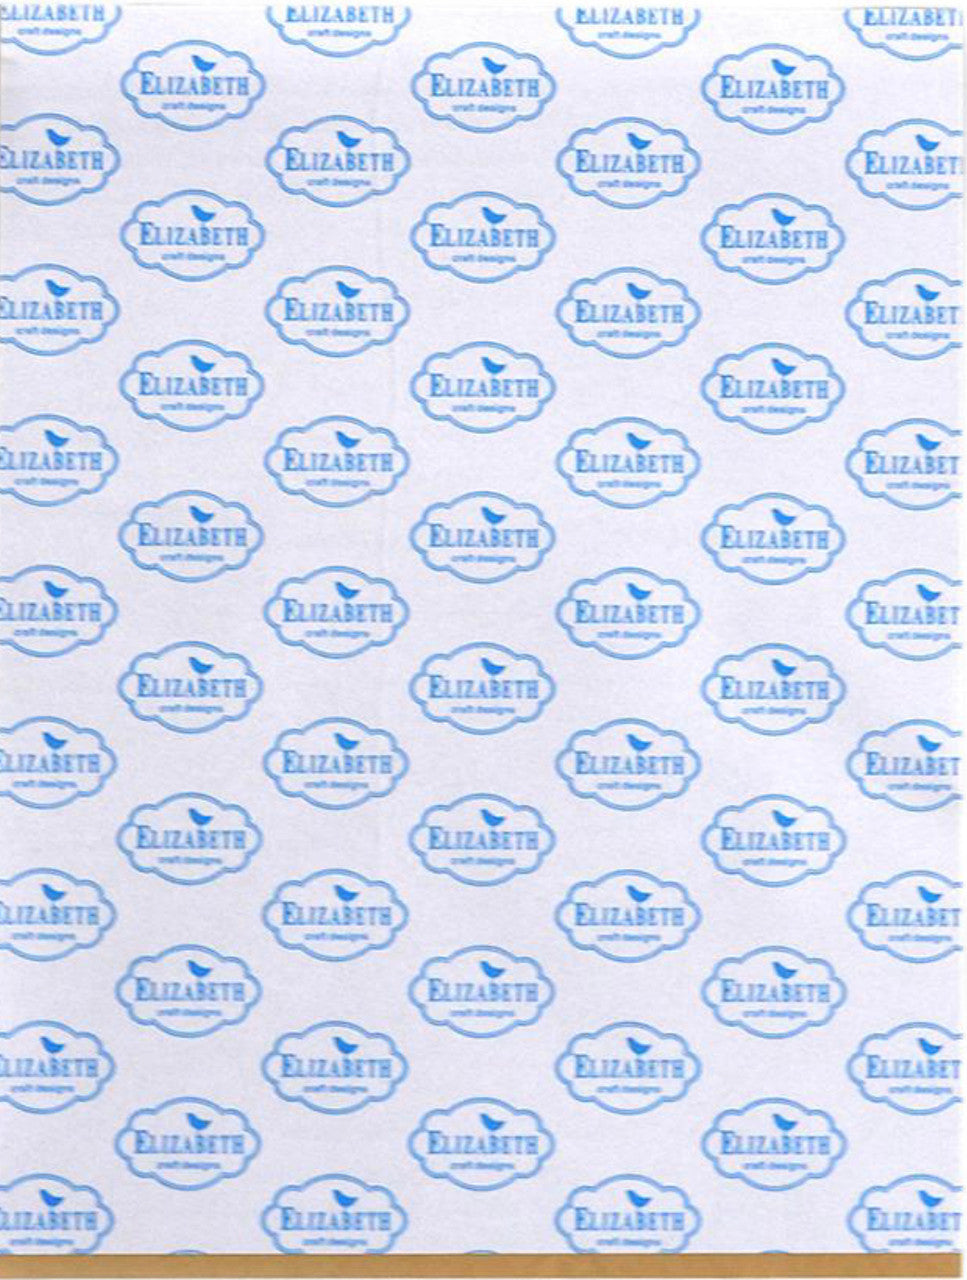 Elizabeth Craft Clear Double Sided Adhesive - 8.5” x 11” Sheets (5 pk)